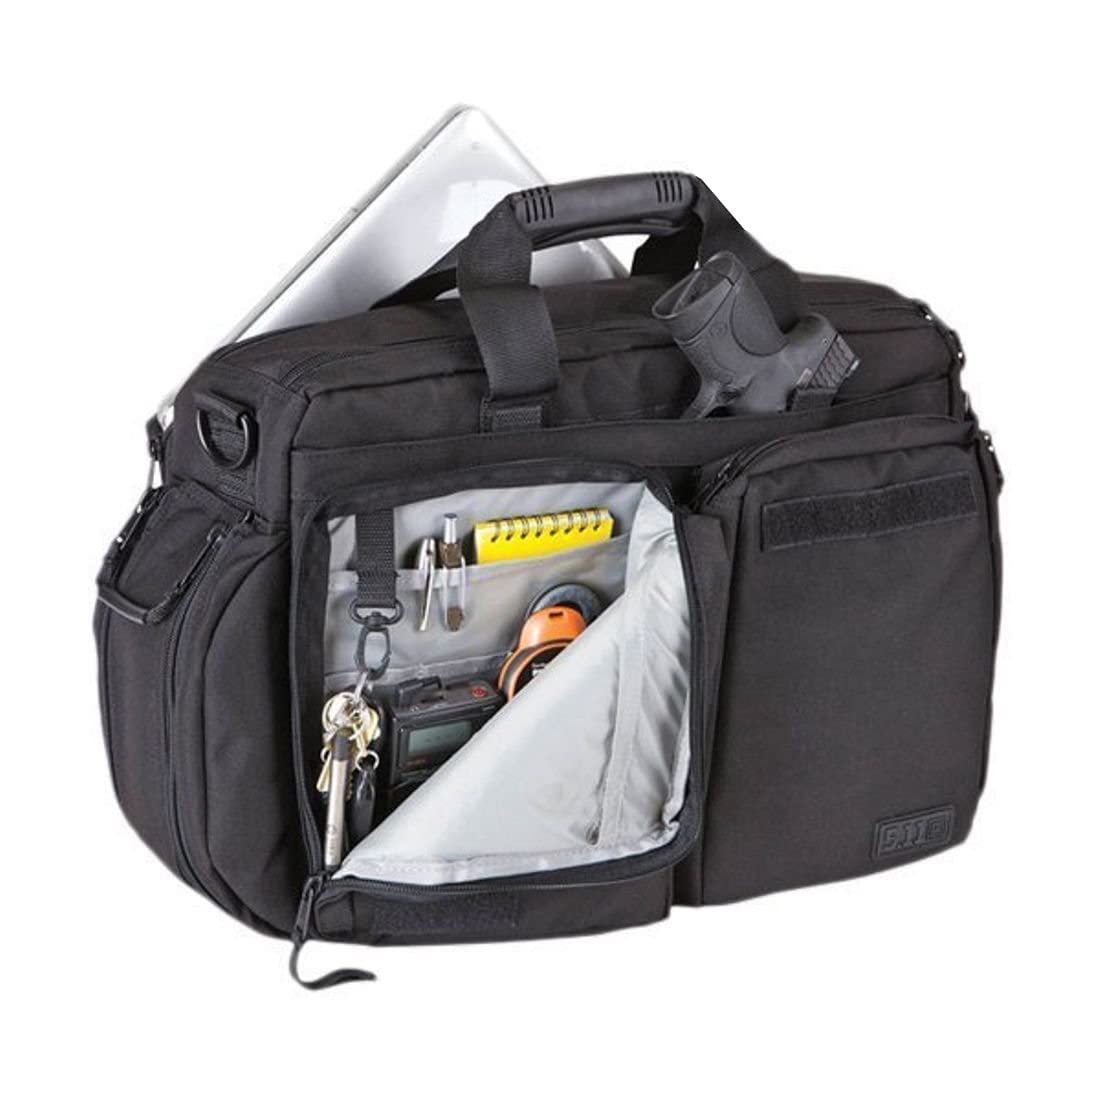 5.11 Tactical.56003 Adult's Side Trip Briefcase